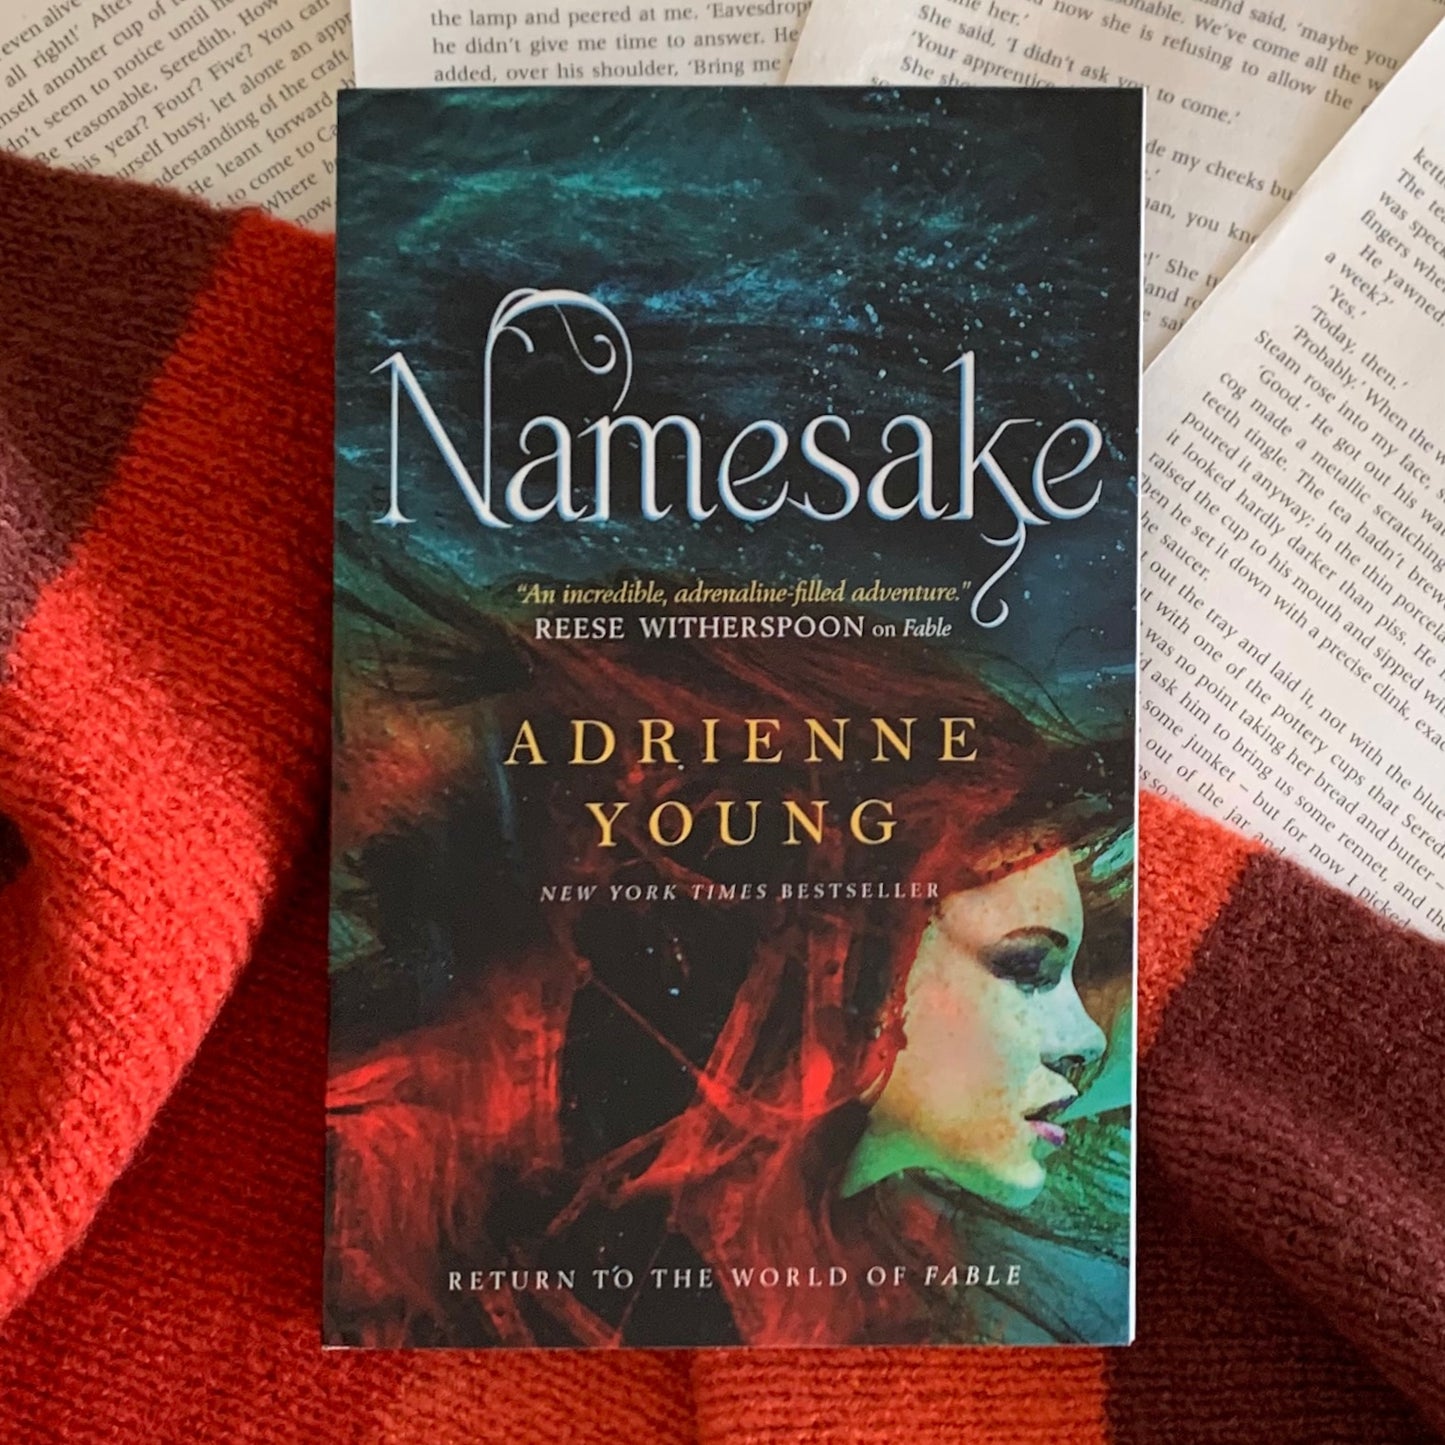 Fable duology by Adrienne Young